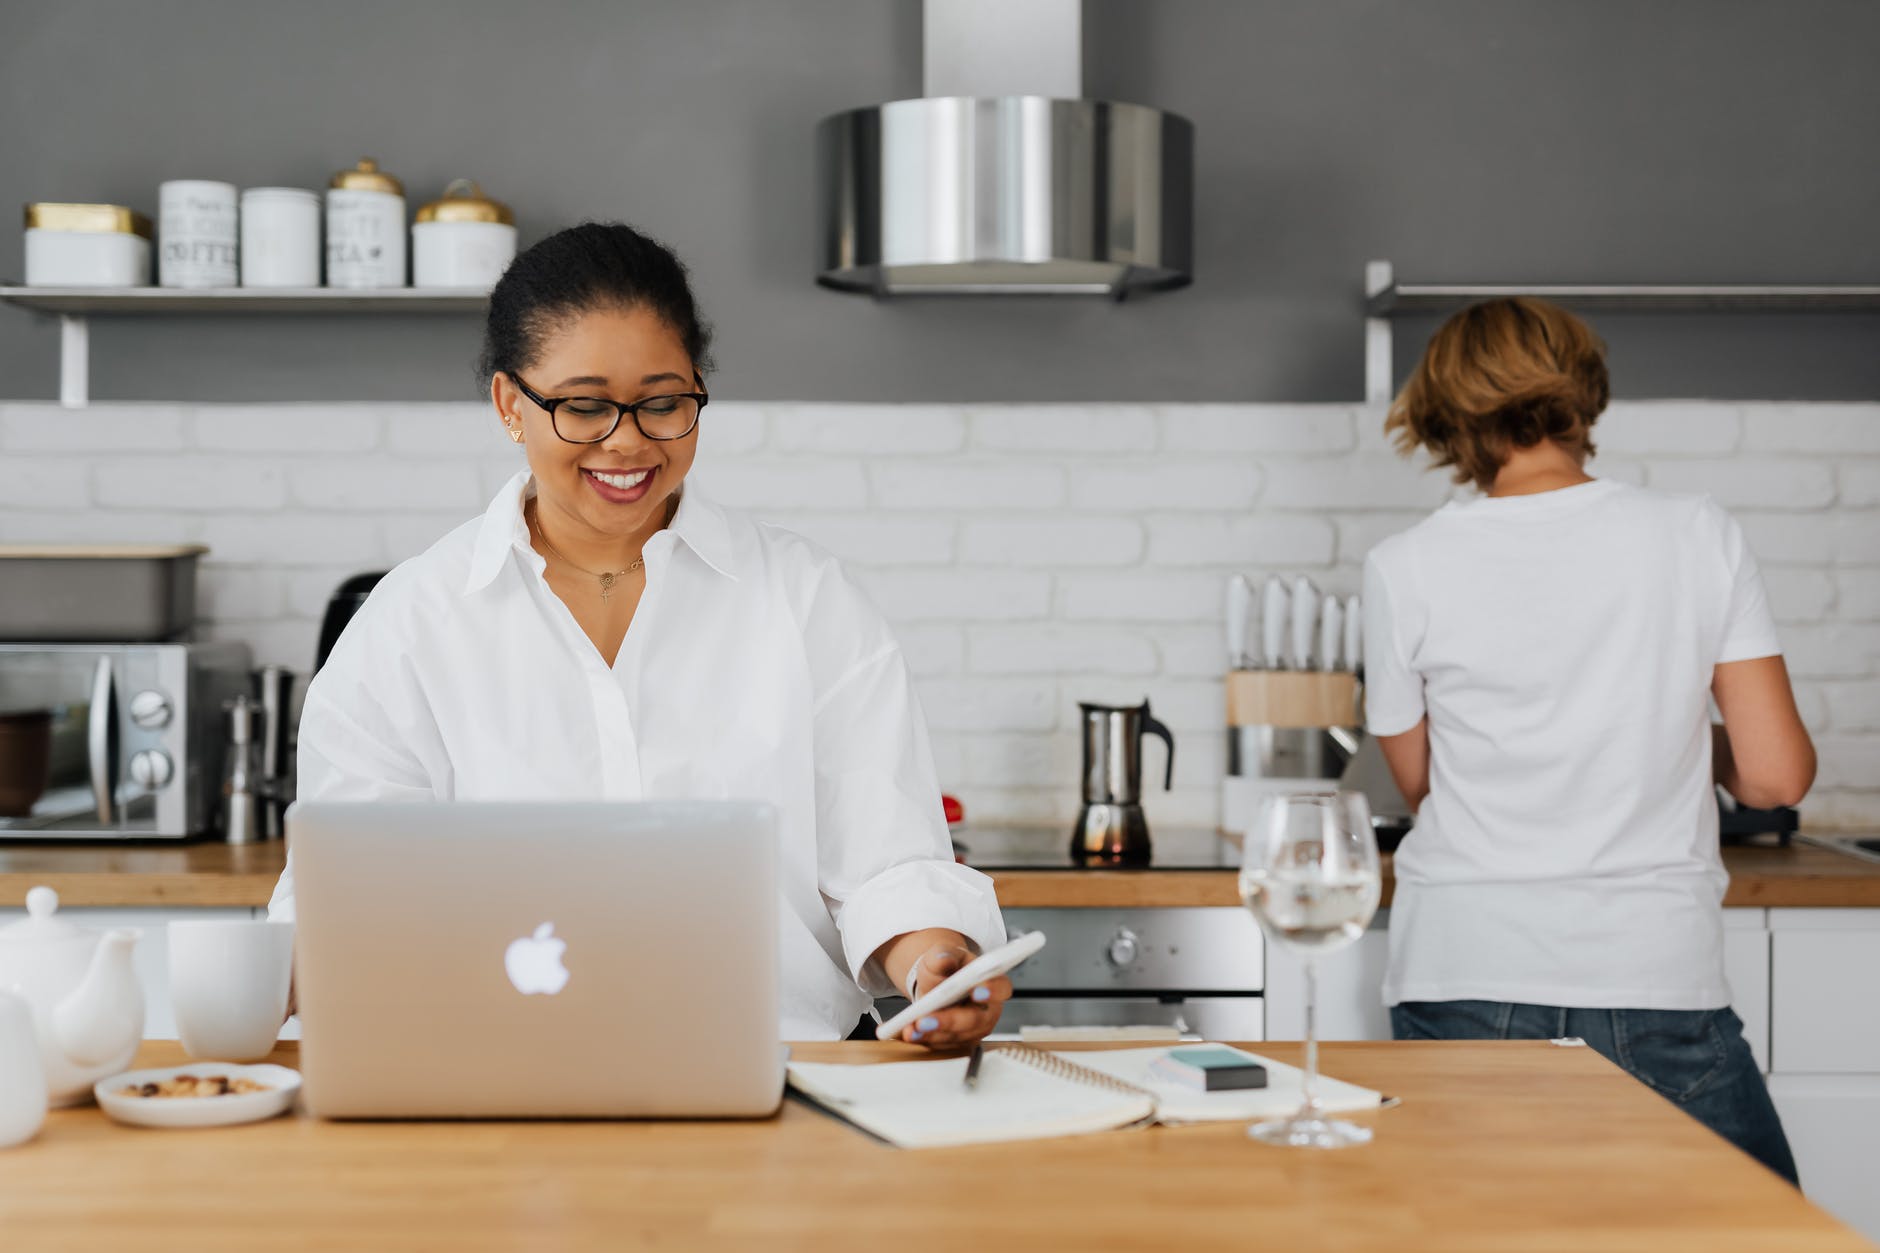 A smiling woman holding a cellphone and working on her laptop on a kitchen counter | Source: Pexels